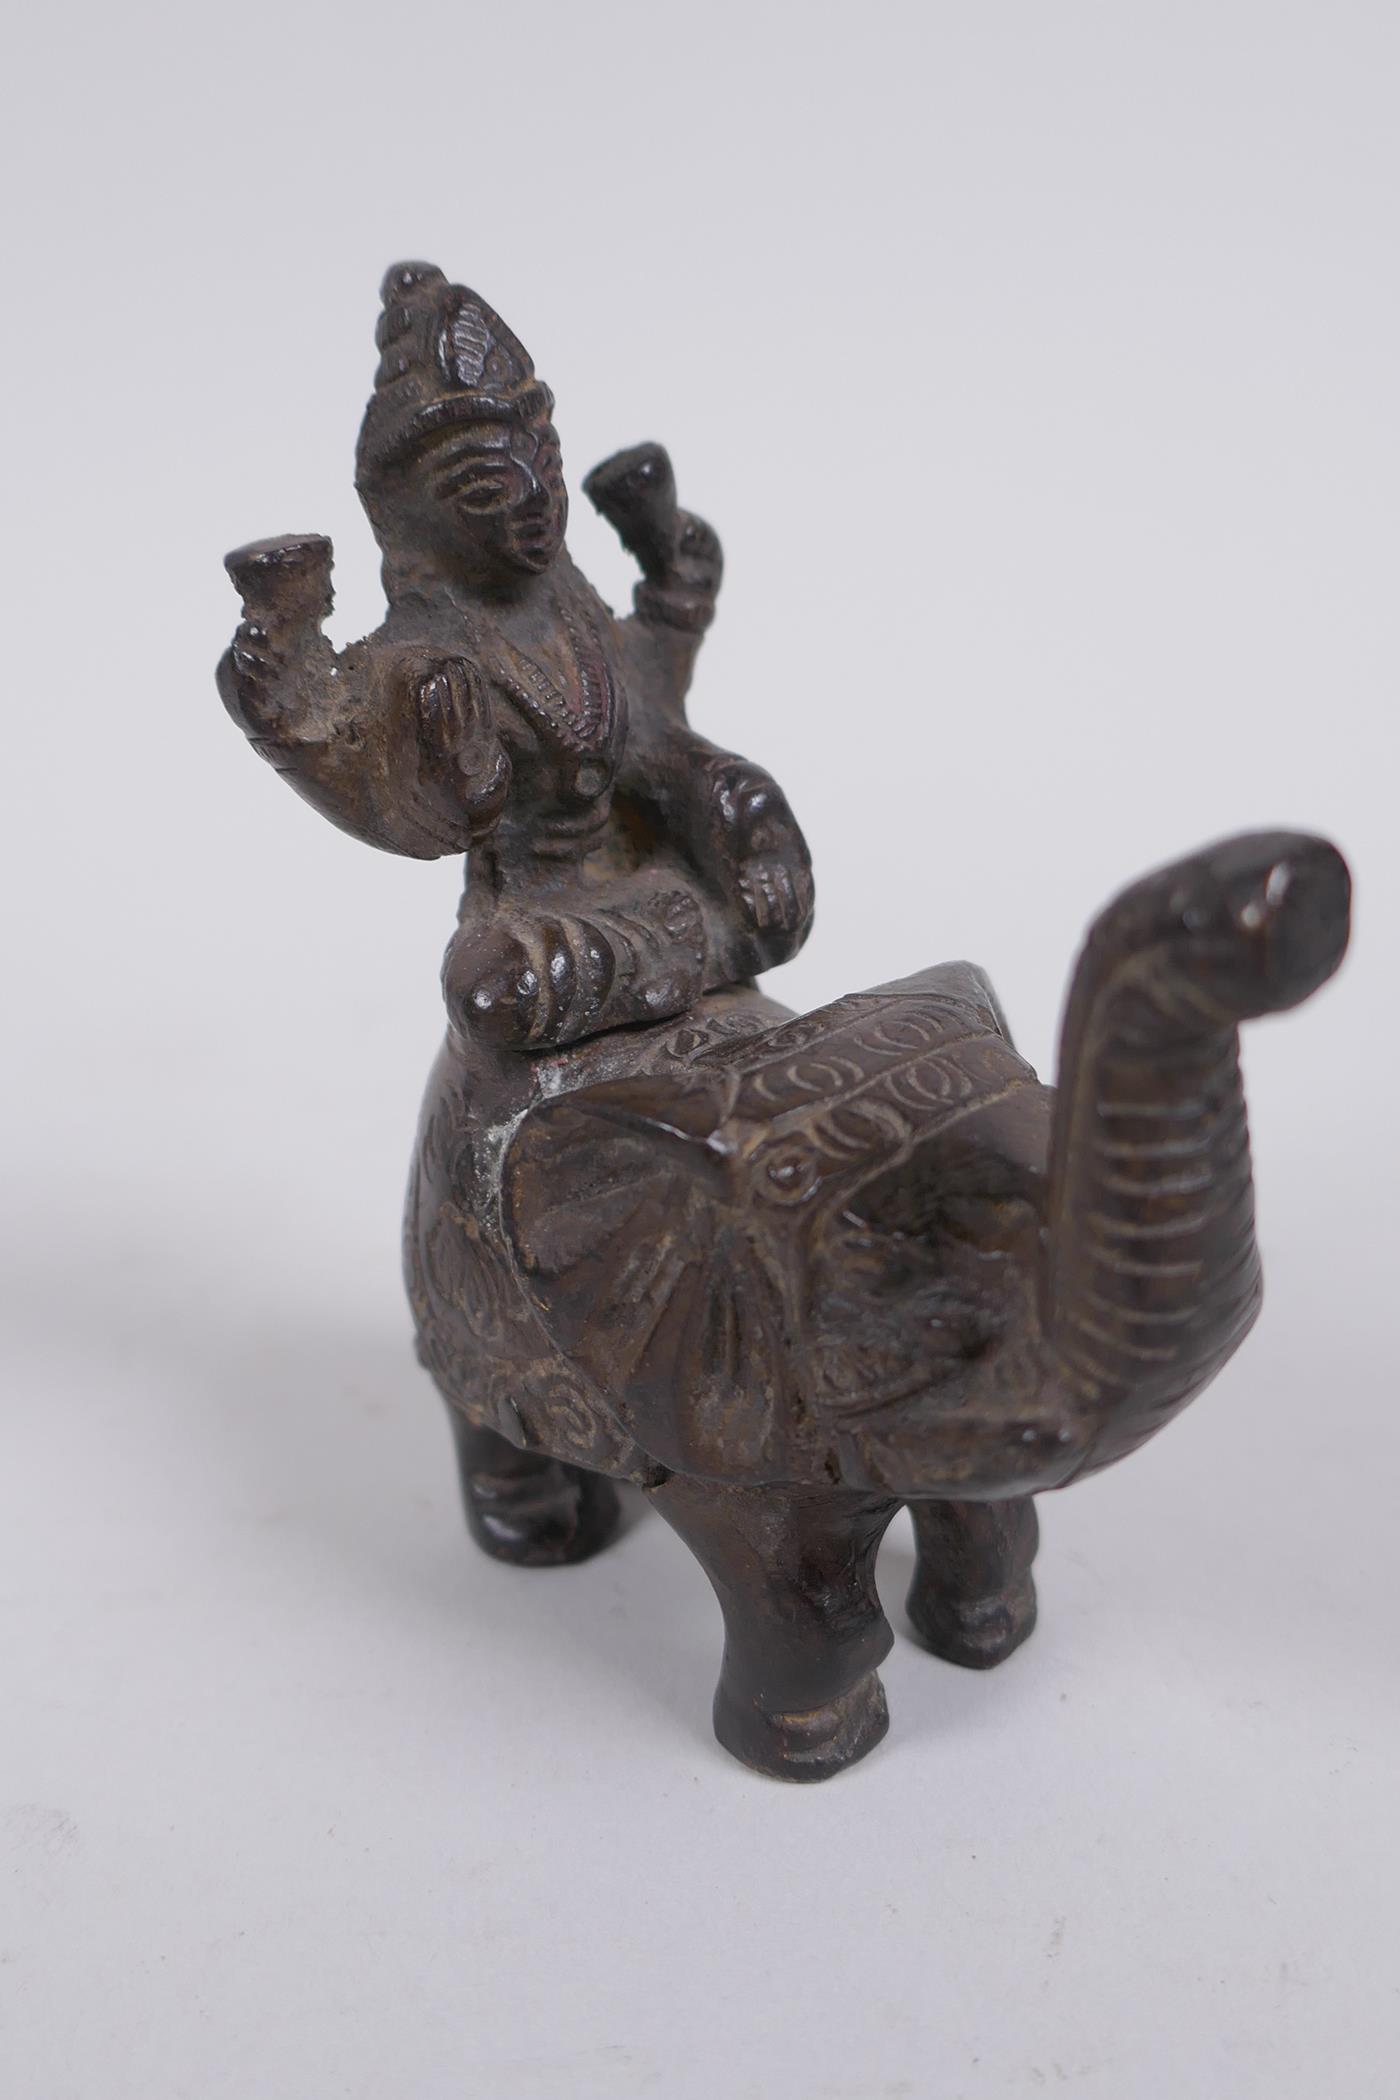 An Indian bronze figure of ganesh, and another Indian bronze figure of a deity riding an elephant, - Image 6 of 6